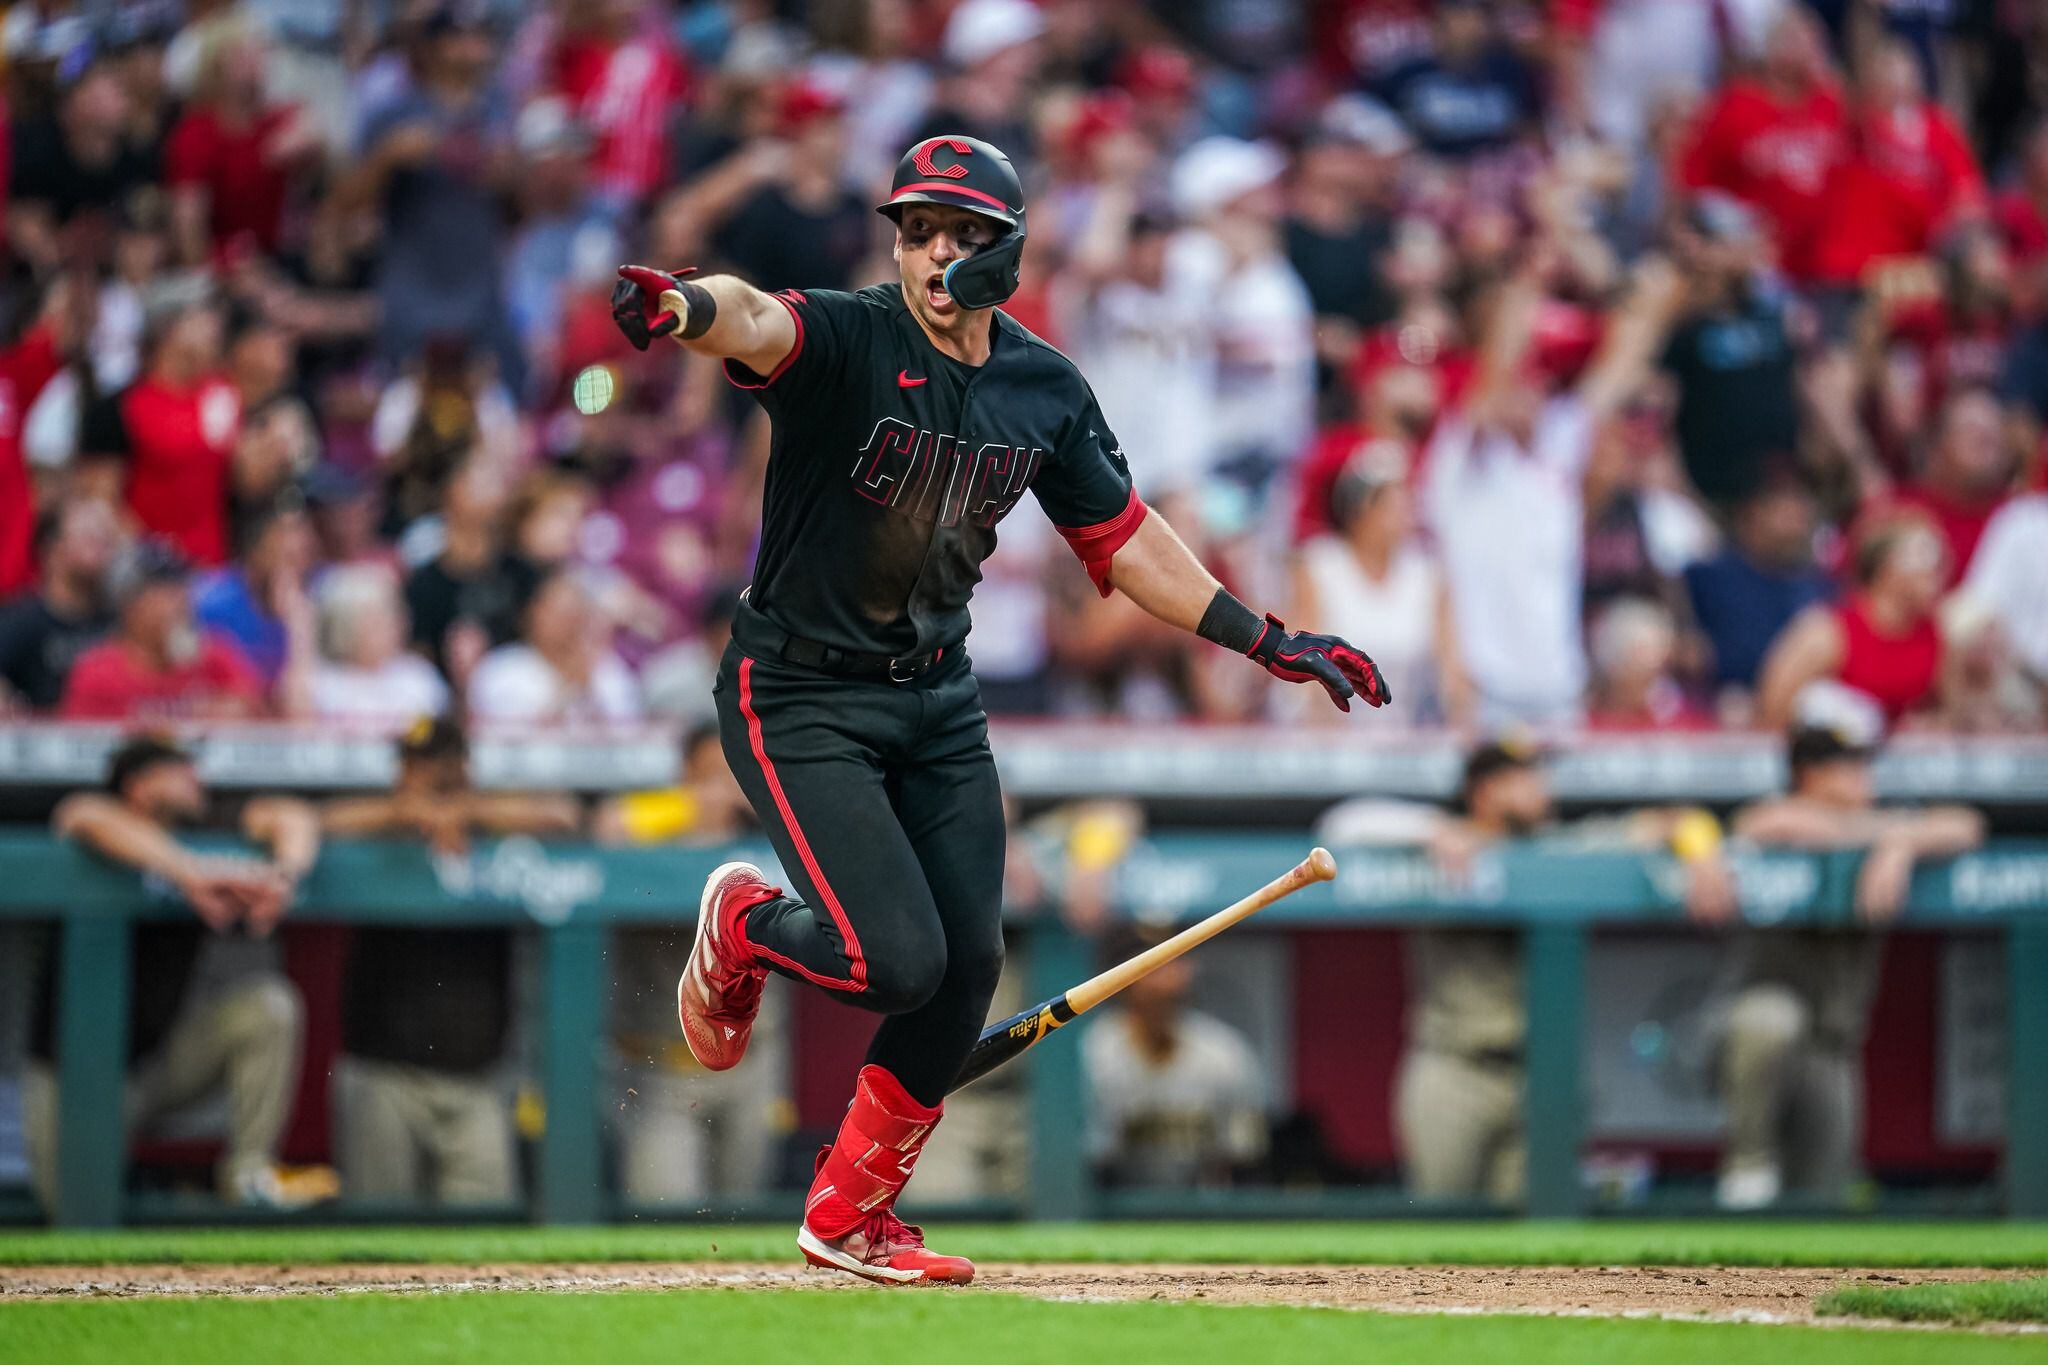 Joey Votto makes history with his 2,000th hit as the Reds beat the